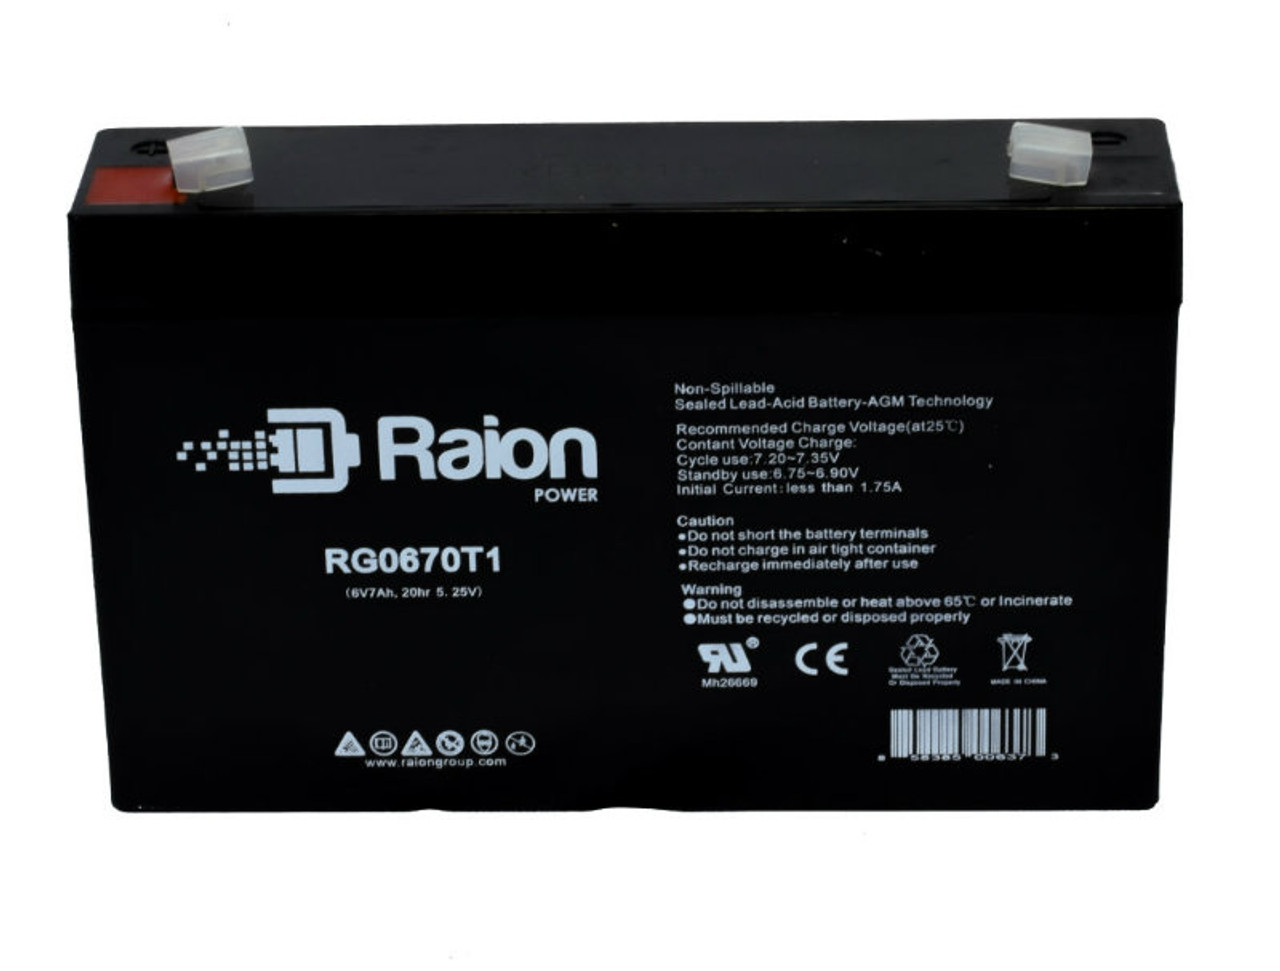 Raion Power RG0670T1 Replacement Battery Cartridge for National Power Corporation GS016Q4